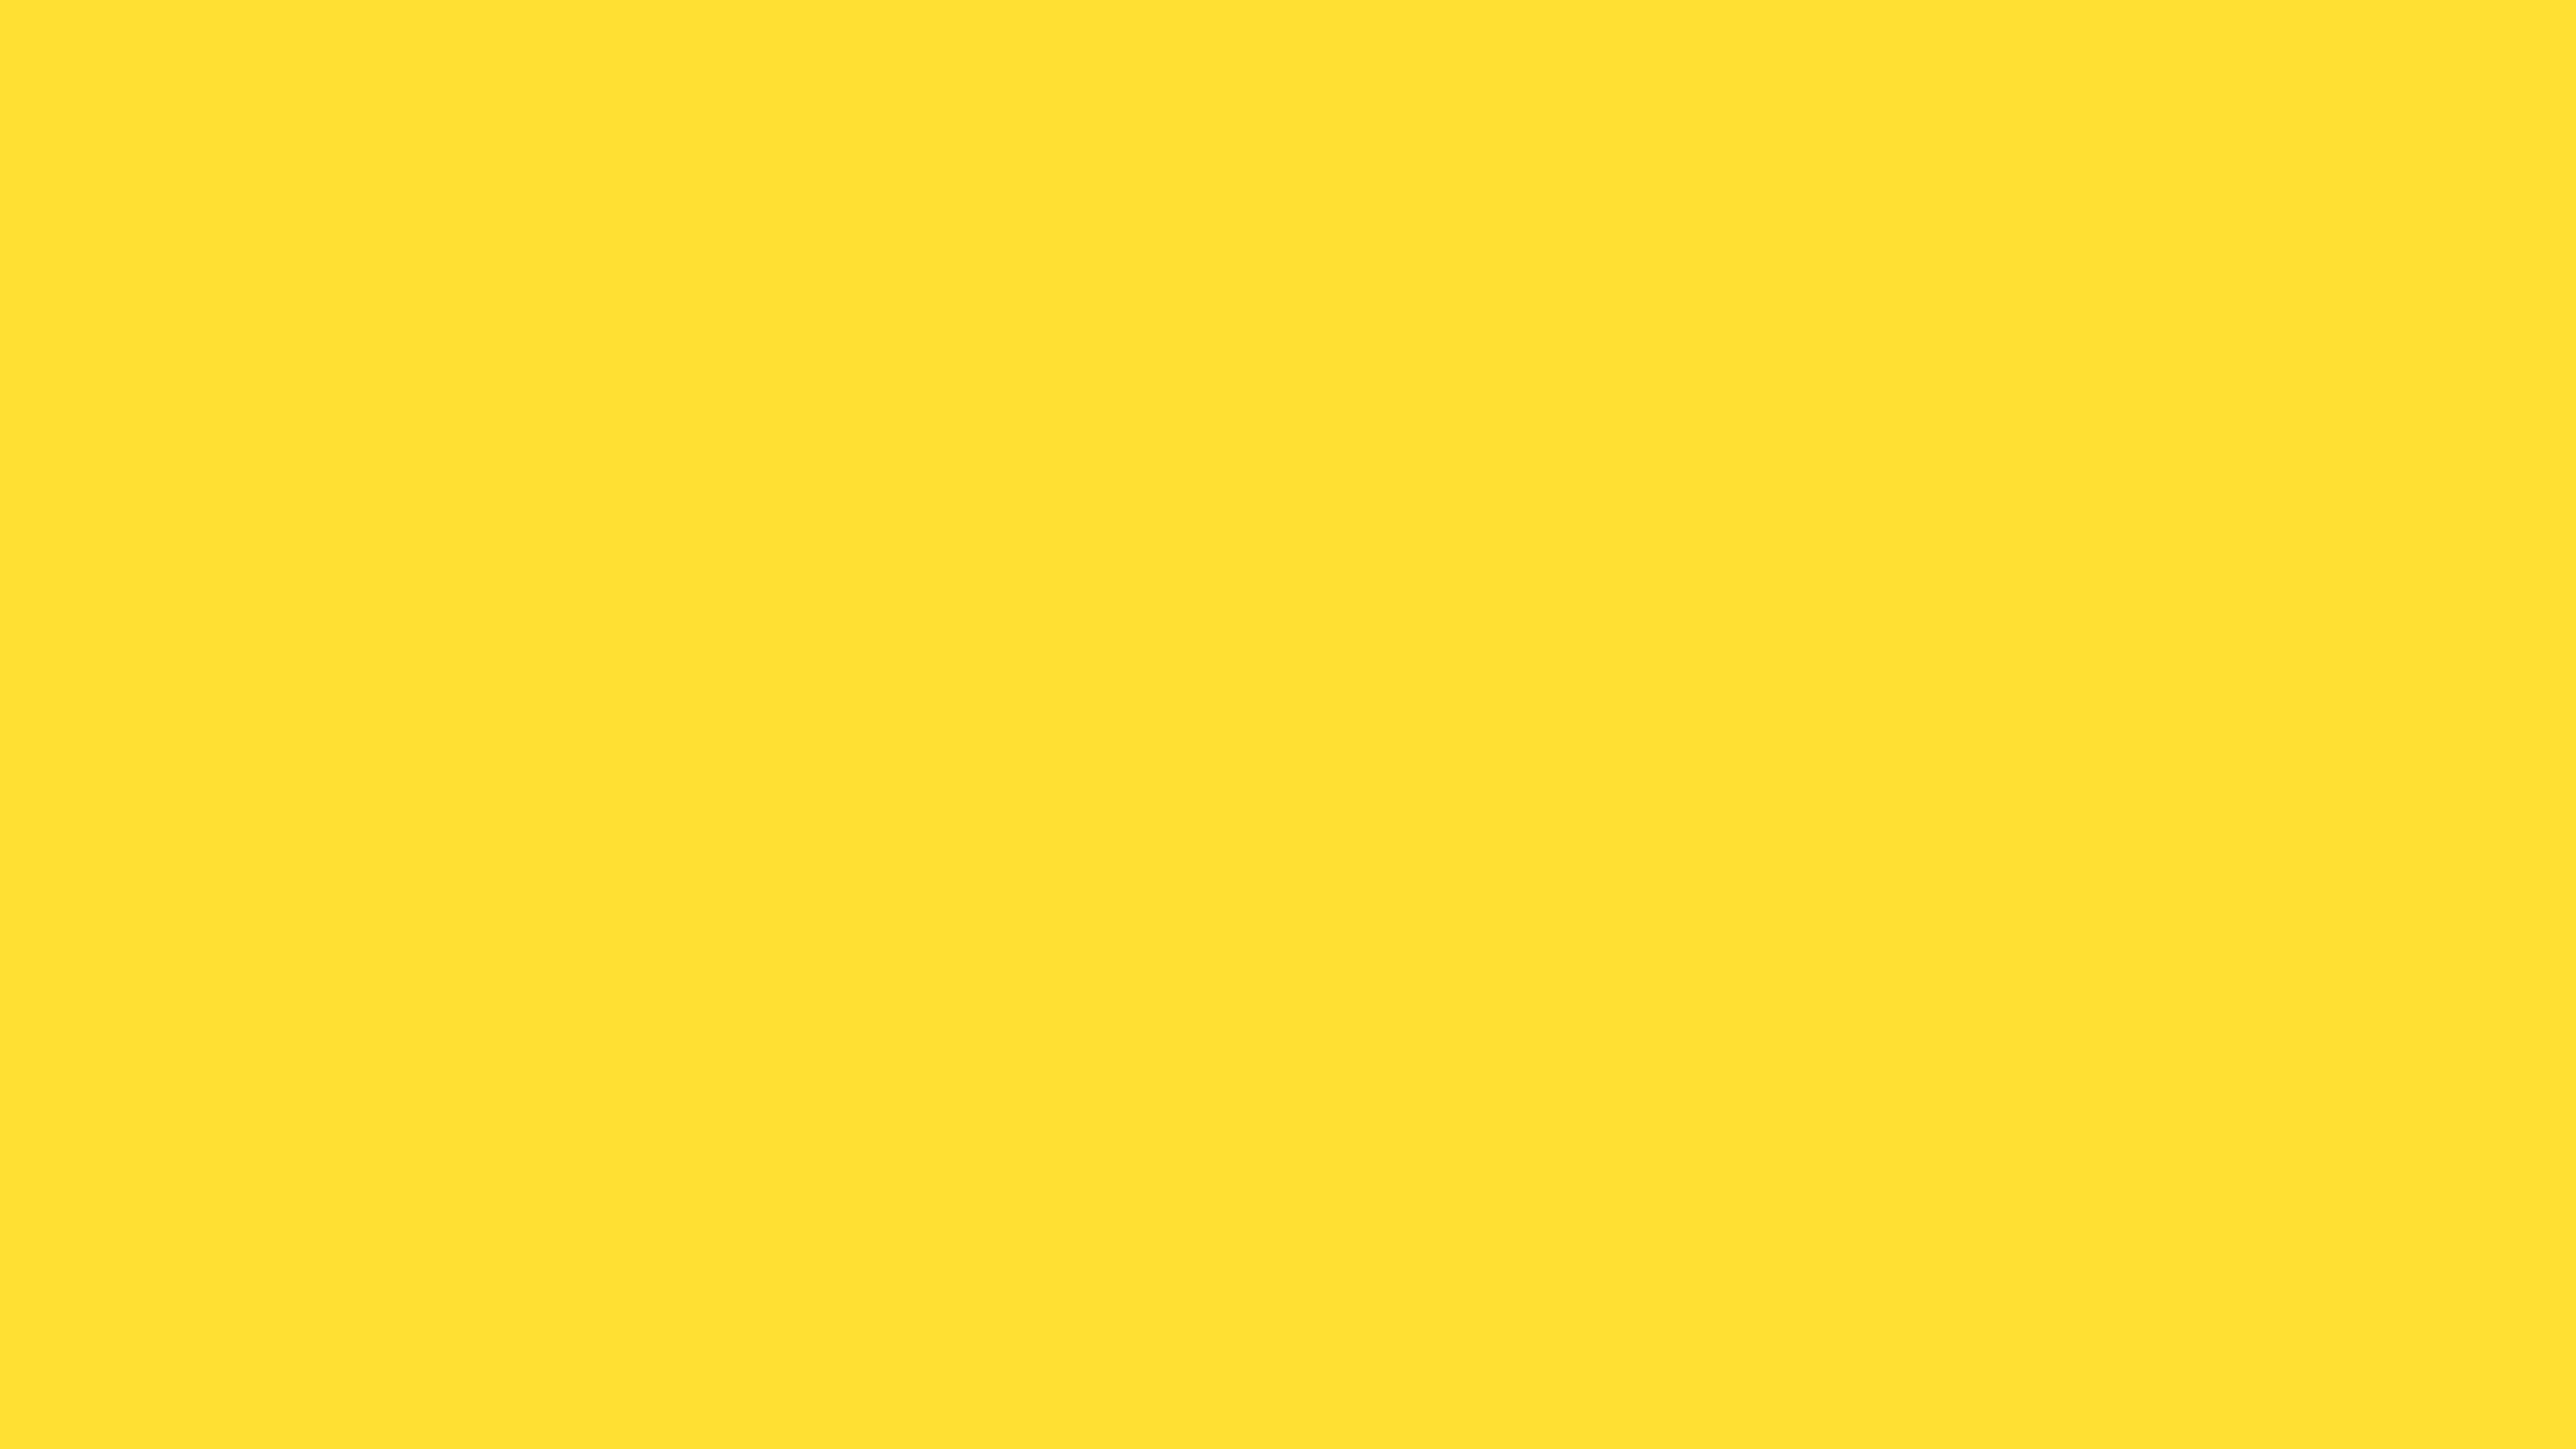 7680x4320 Banana Yellow Solid Color Background